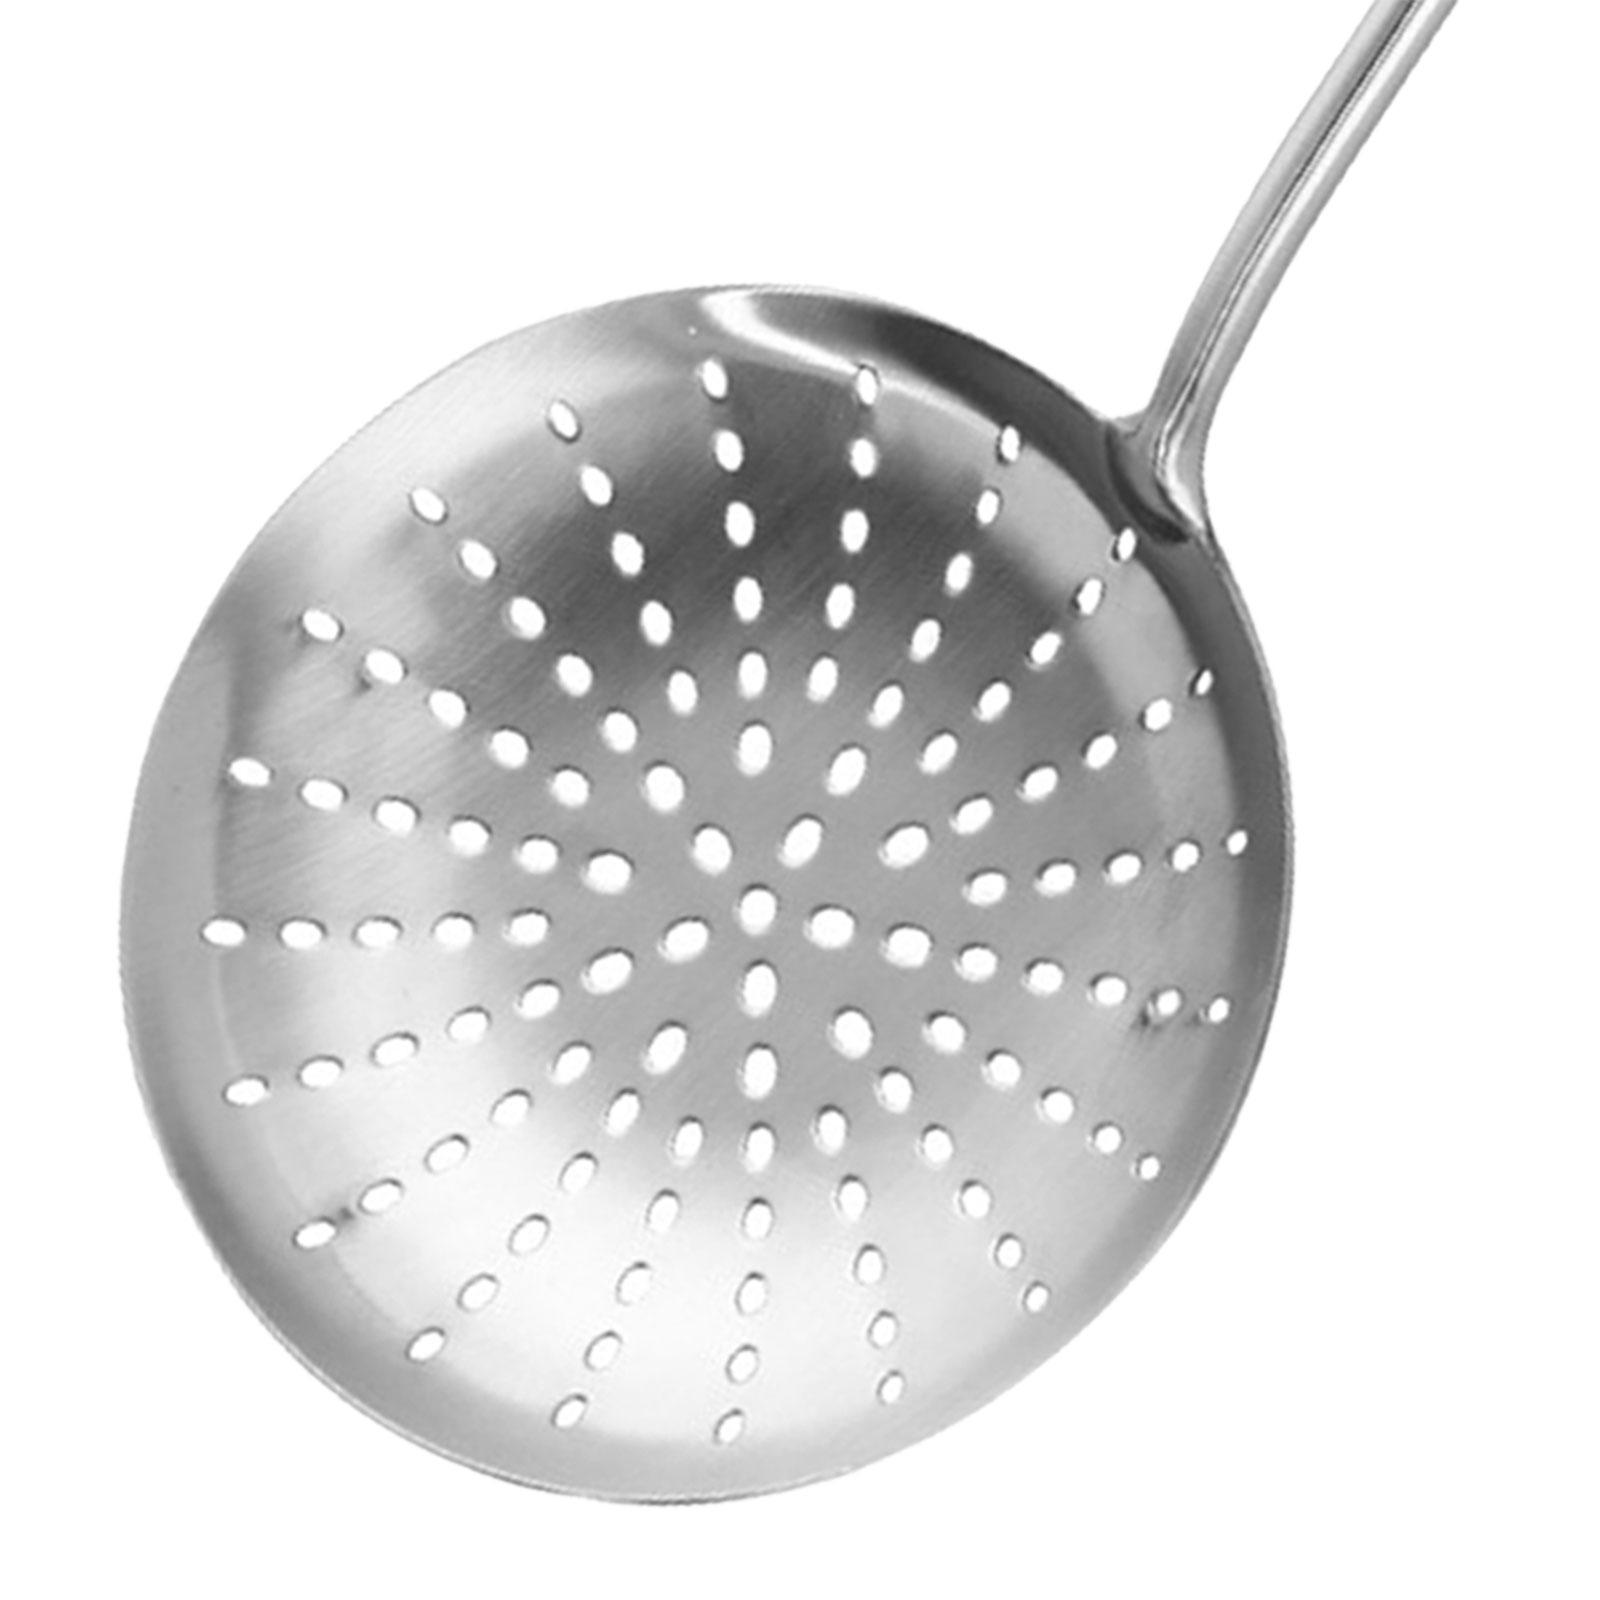 Skimmer Slotted Spoon Stainless Steel Deep Frying Skimmer Spoon for Scooping - image 4 of 9